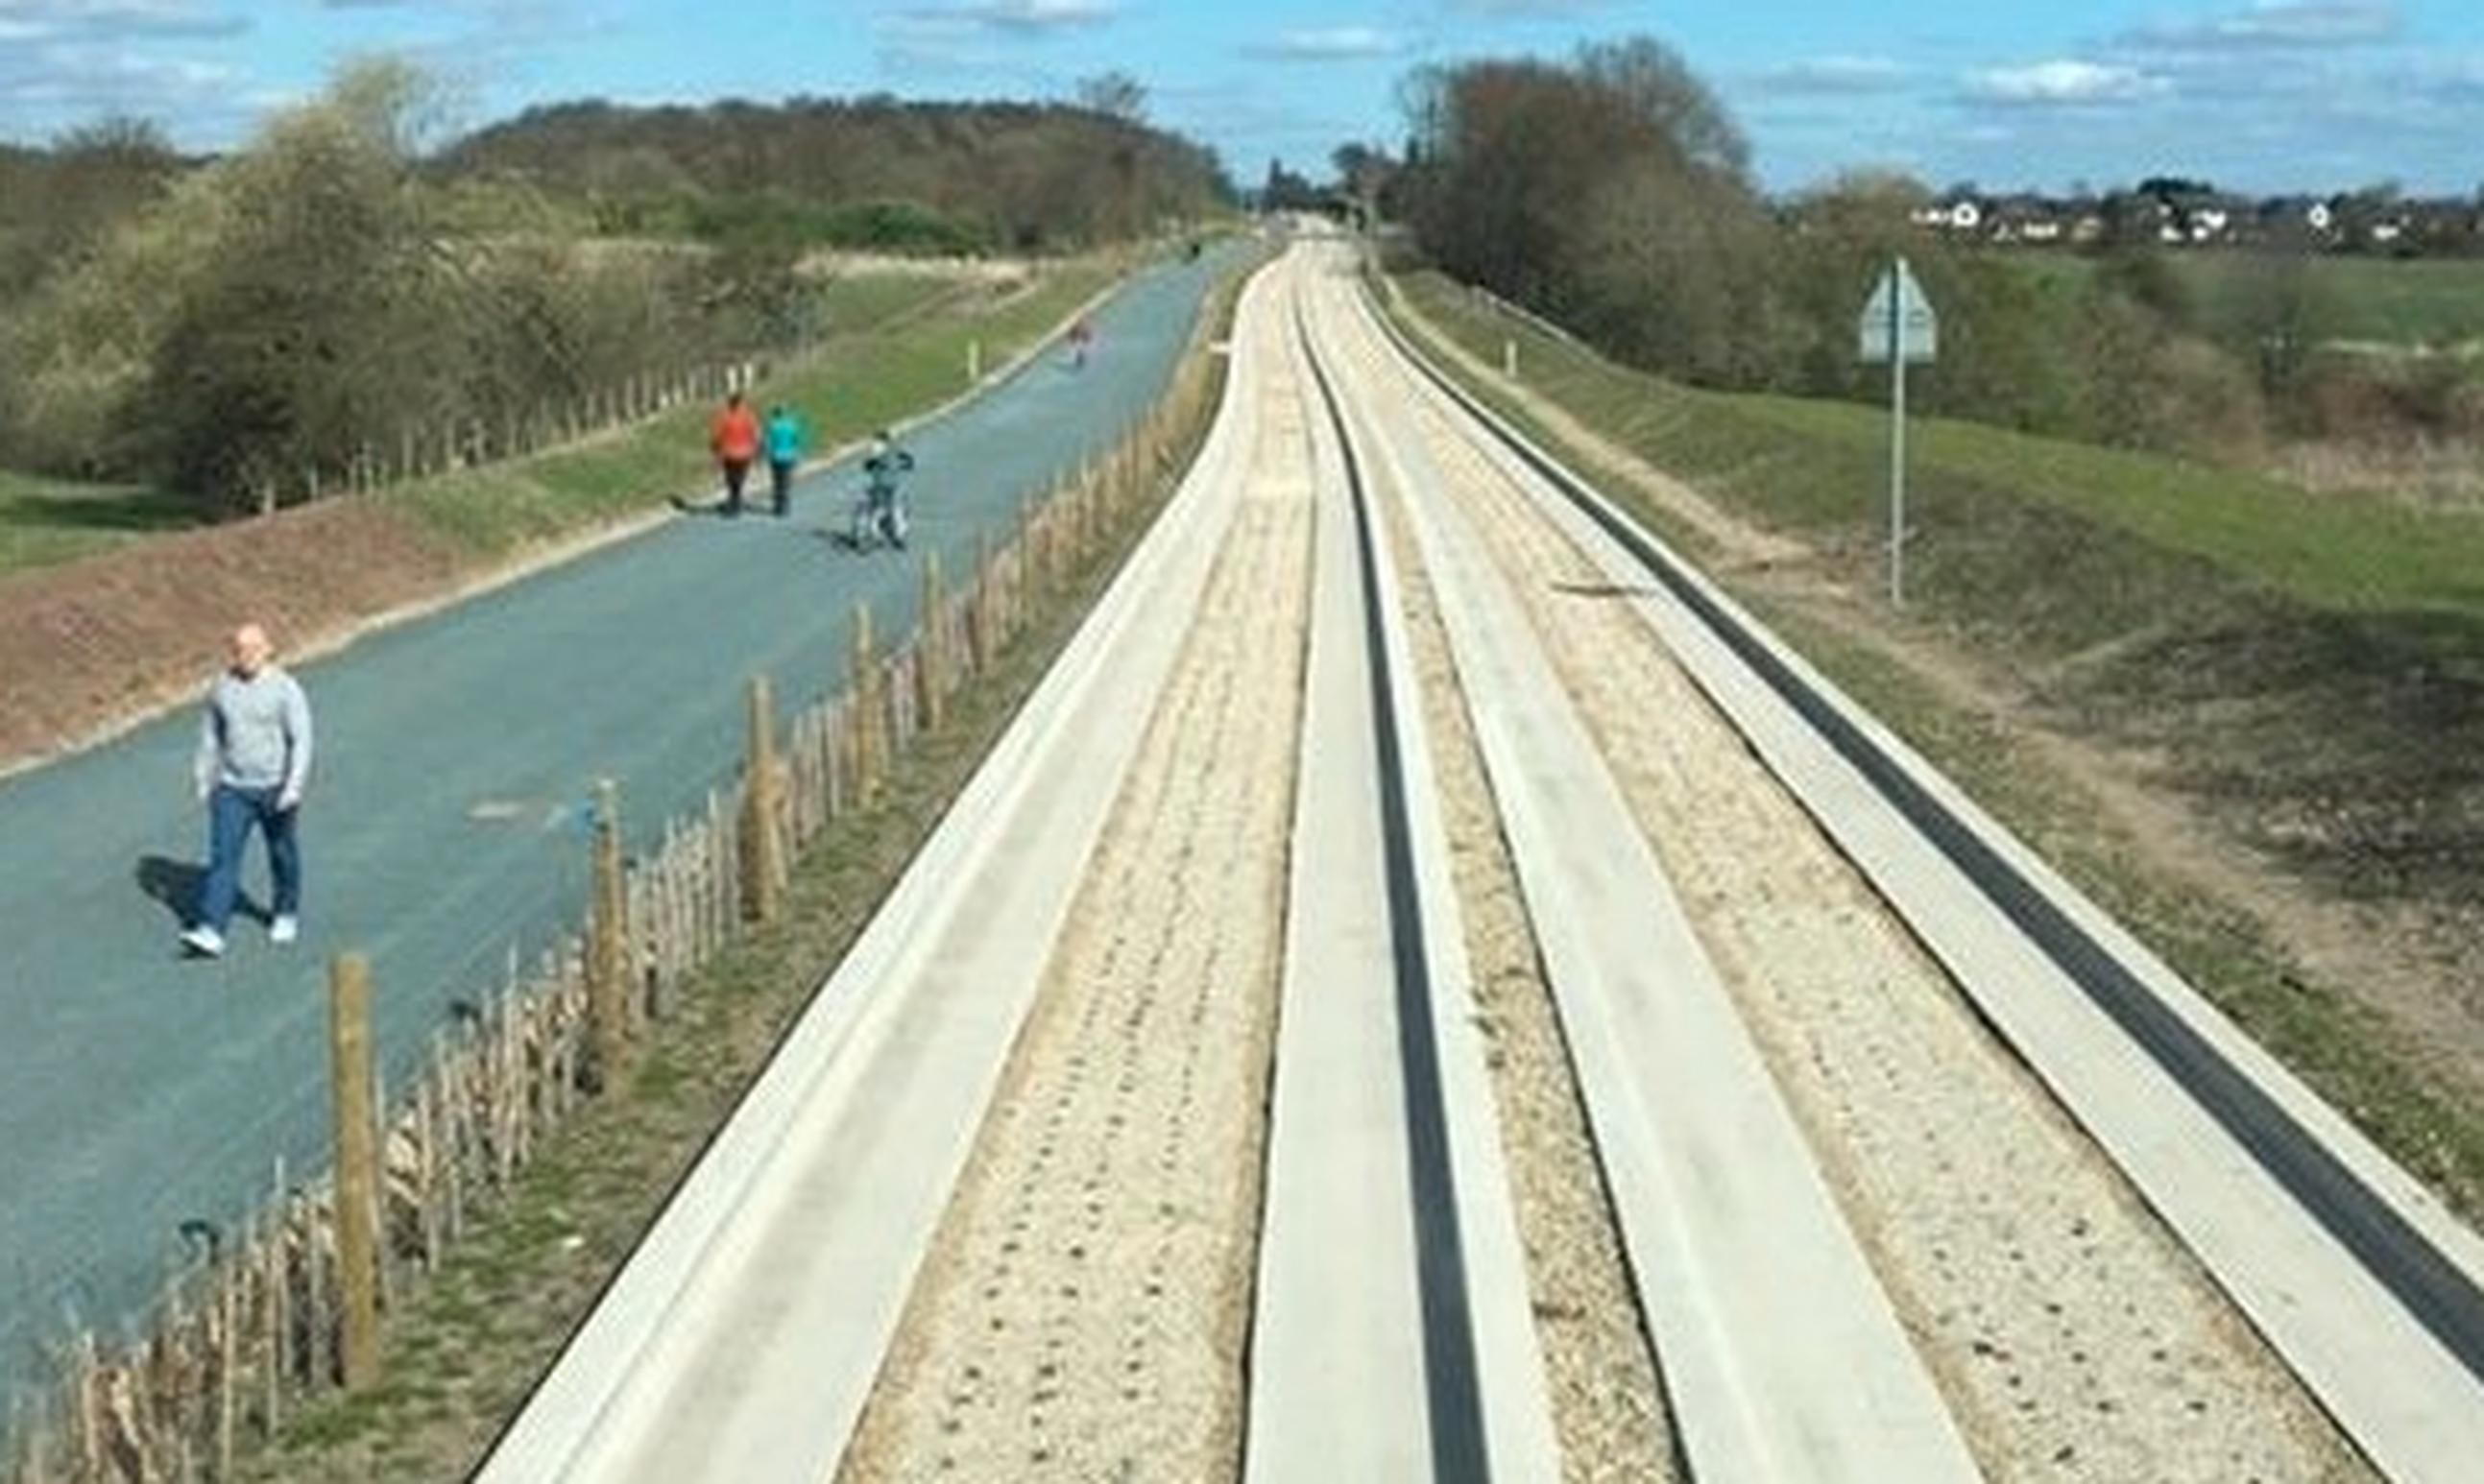 The award-winning Ellenbrook guided busway in west Manchester